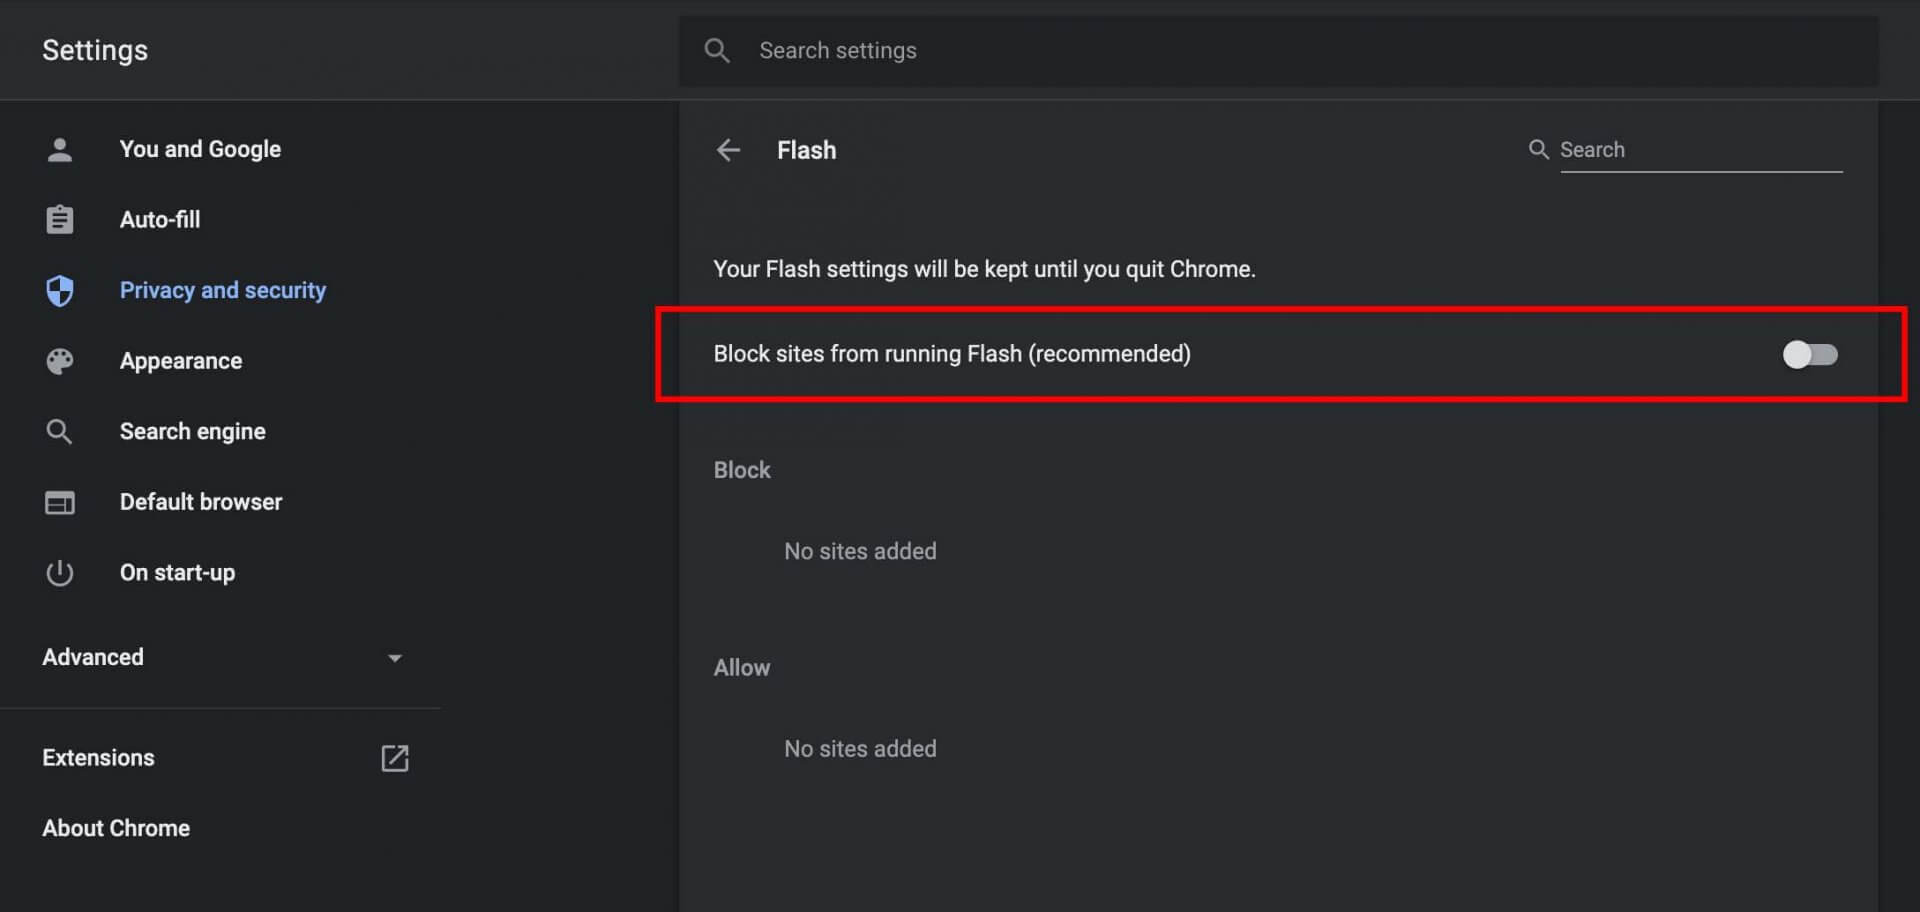 Enabling Flash for Google Chrome HowTo Guide